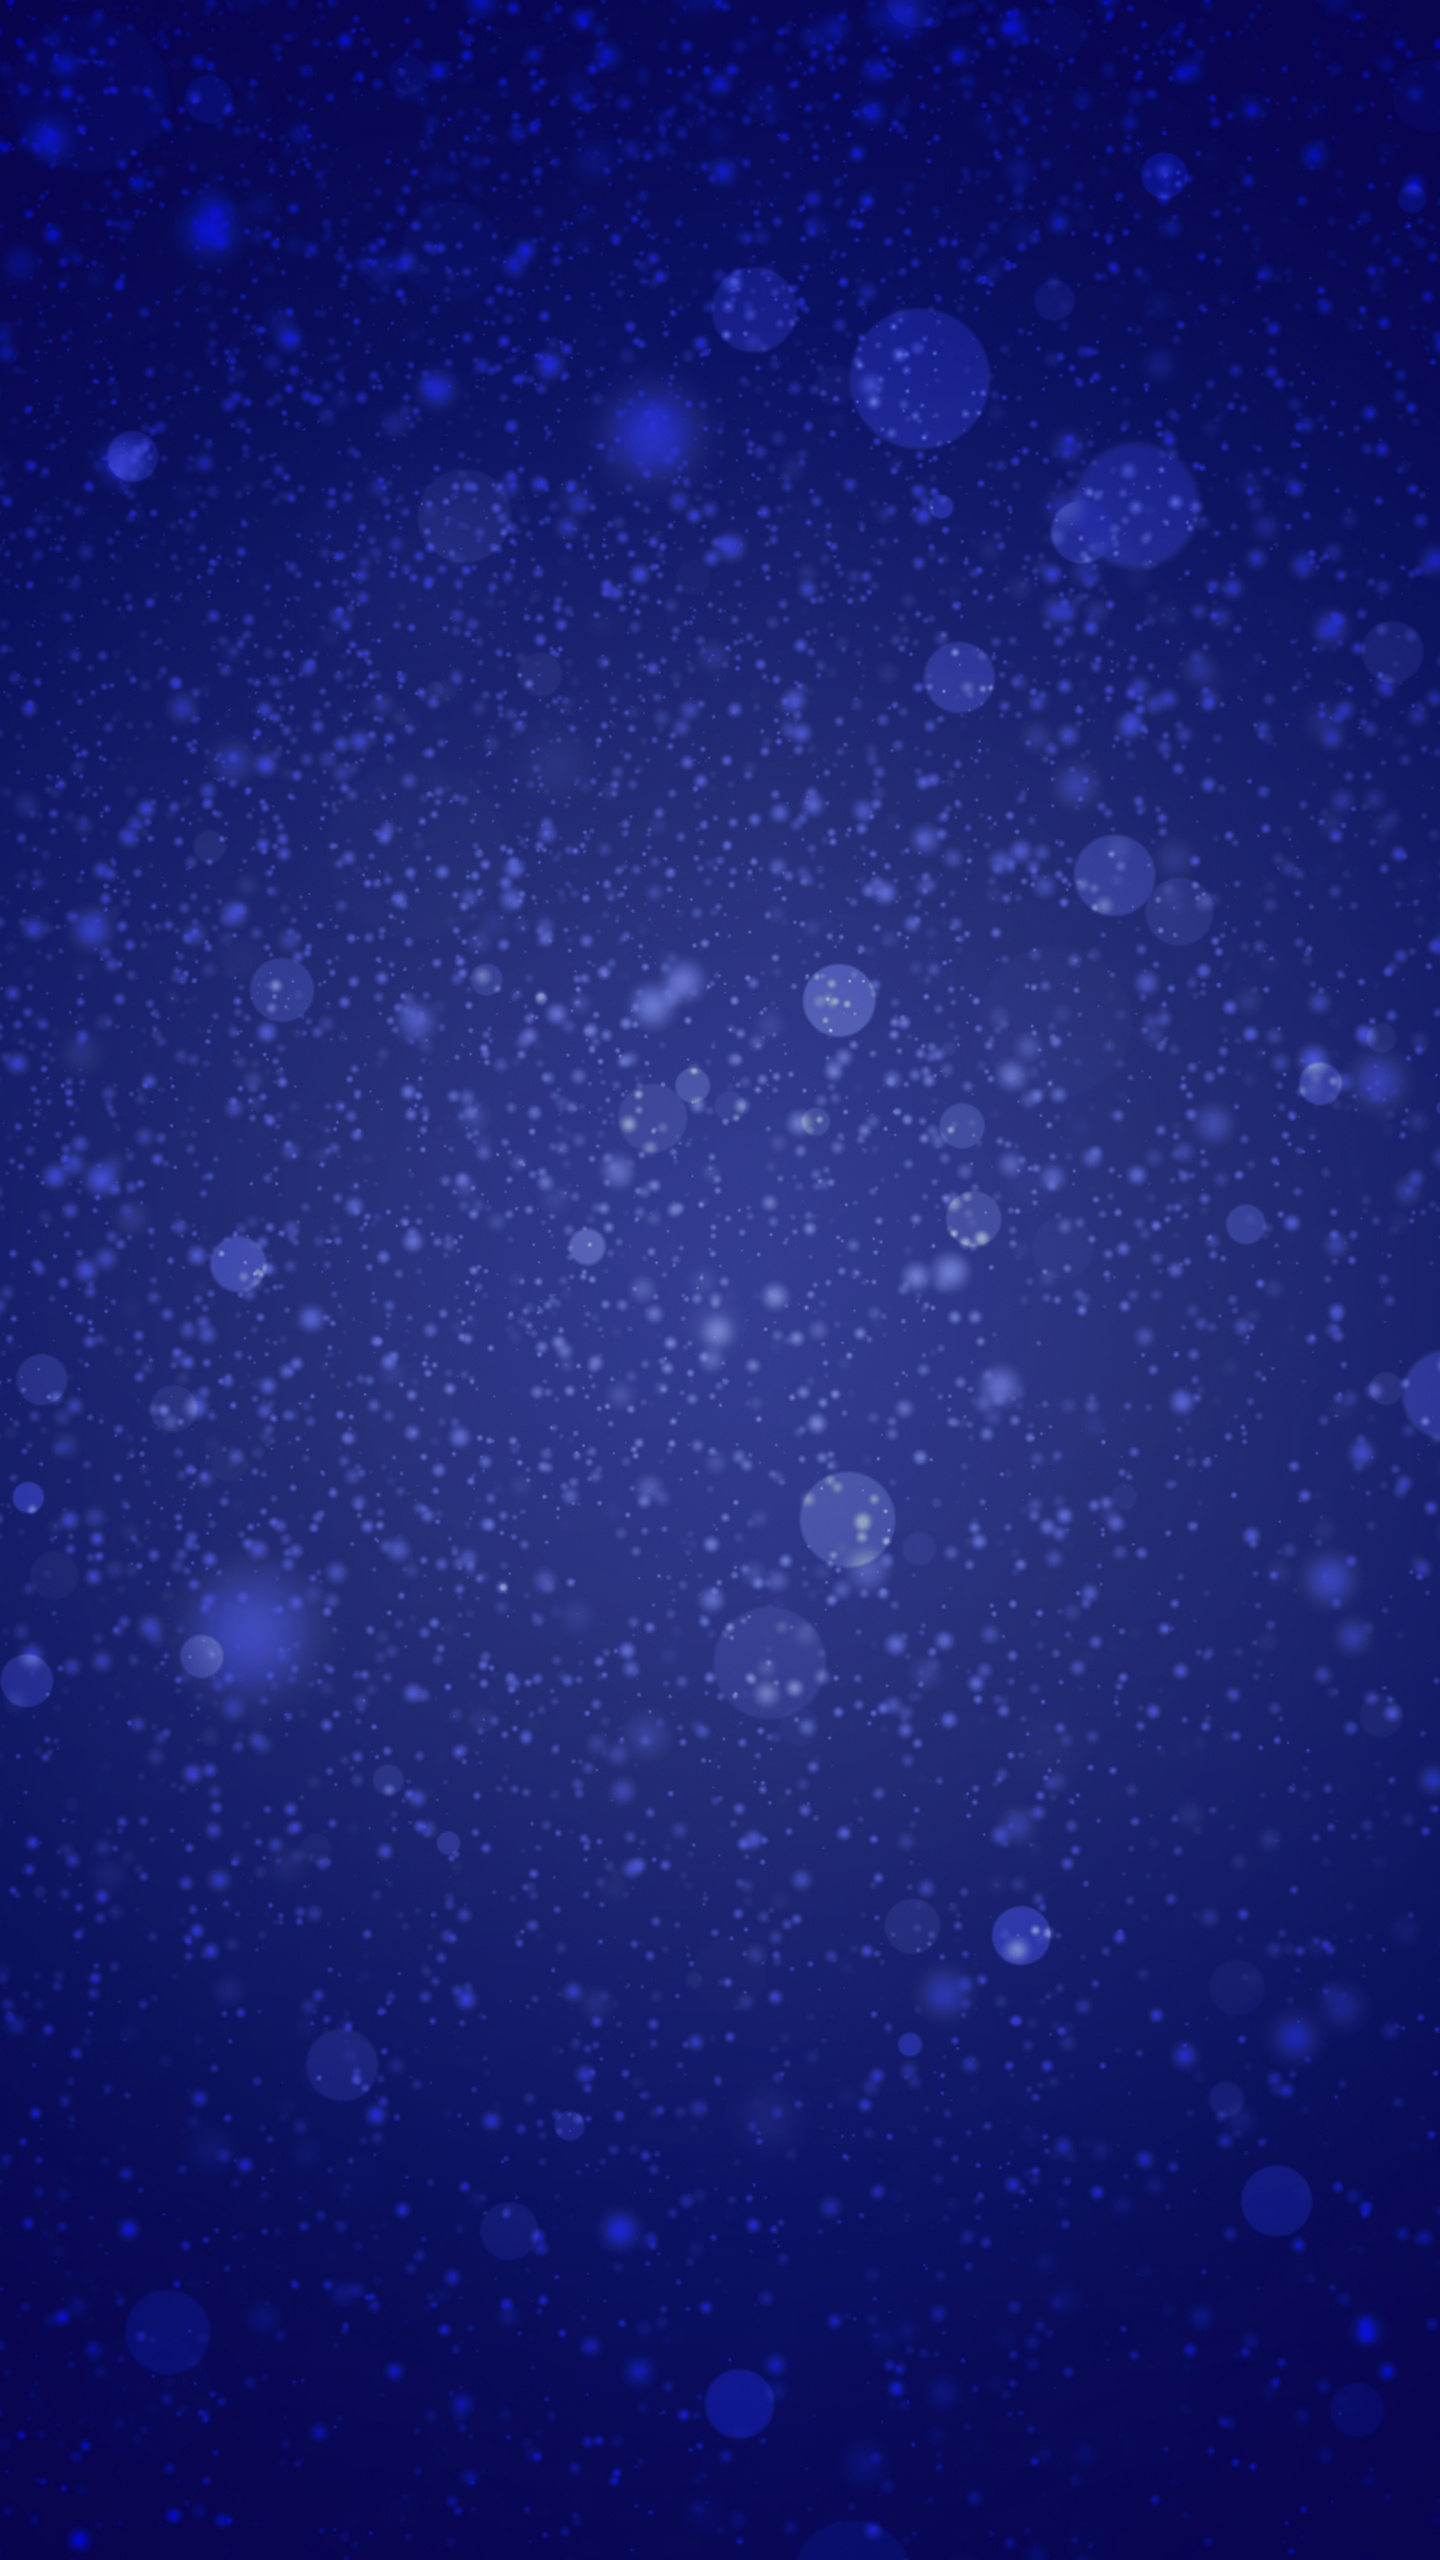 Blue and White Galaxy Illustration. Wallpaper in 1440x2560 Resolution